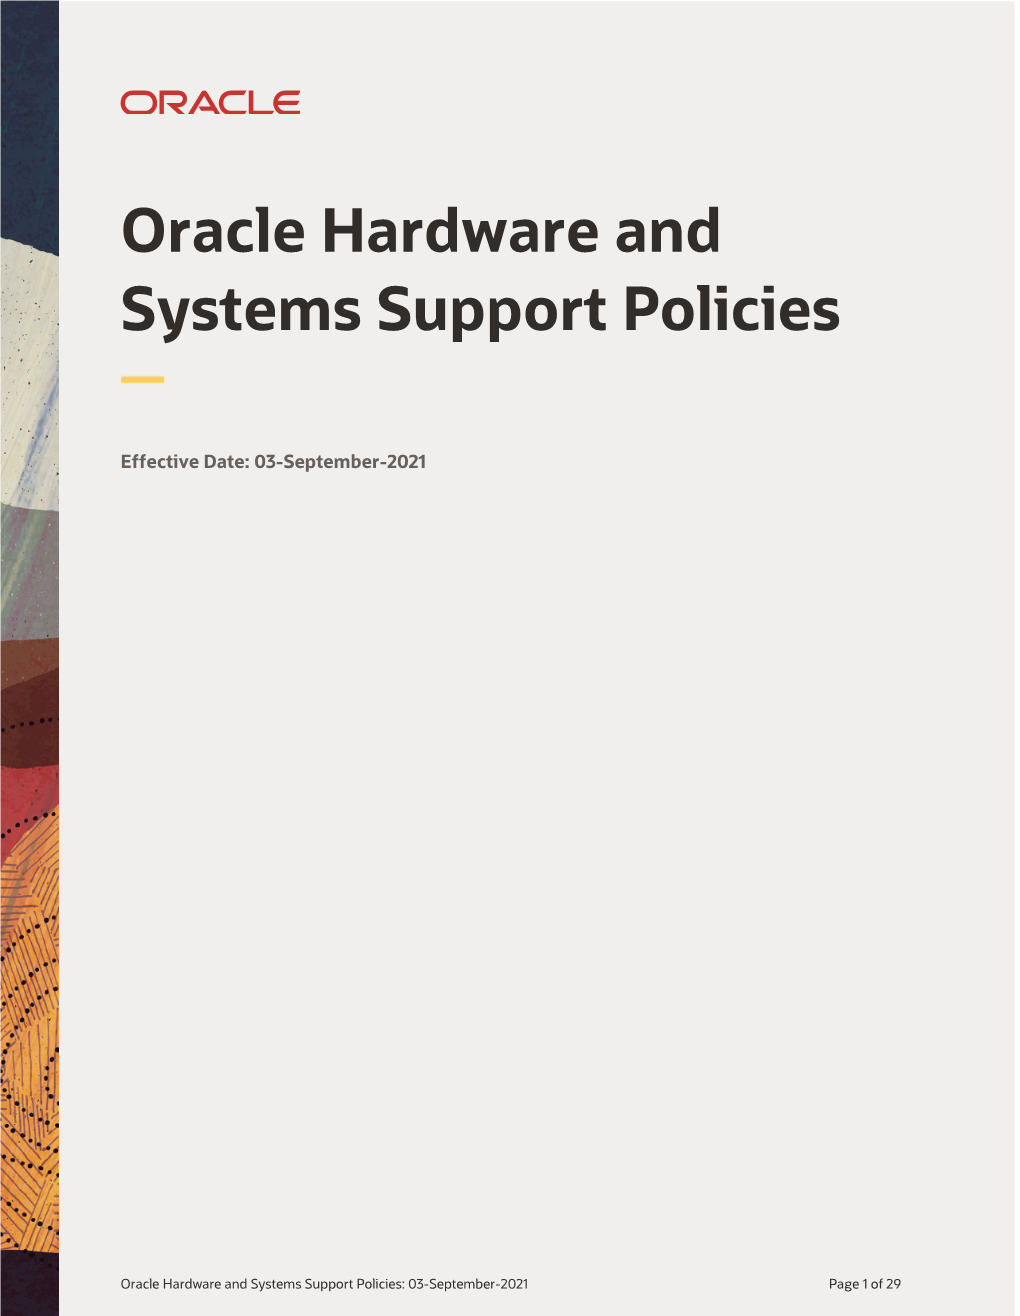 Oracle Hardware and Systems Support Policies Details